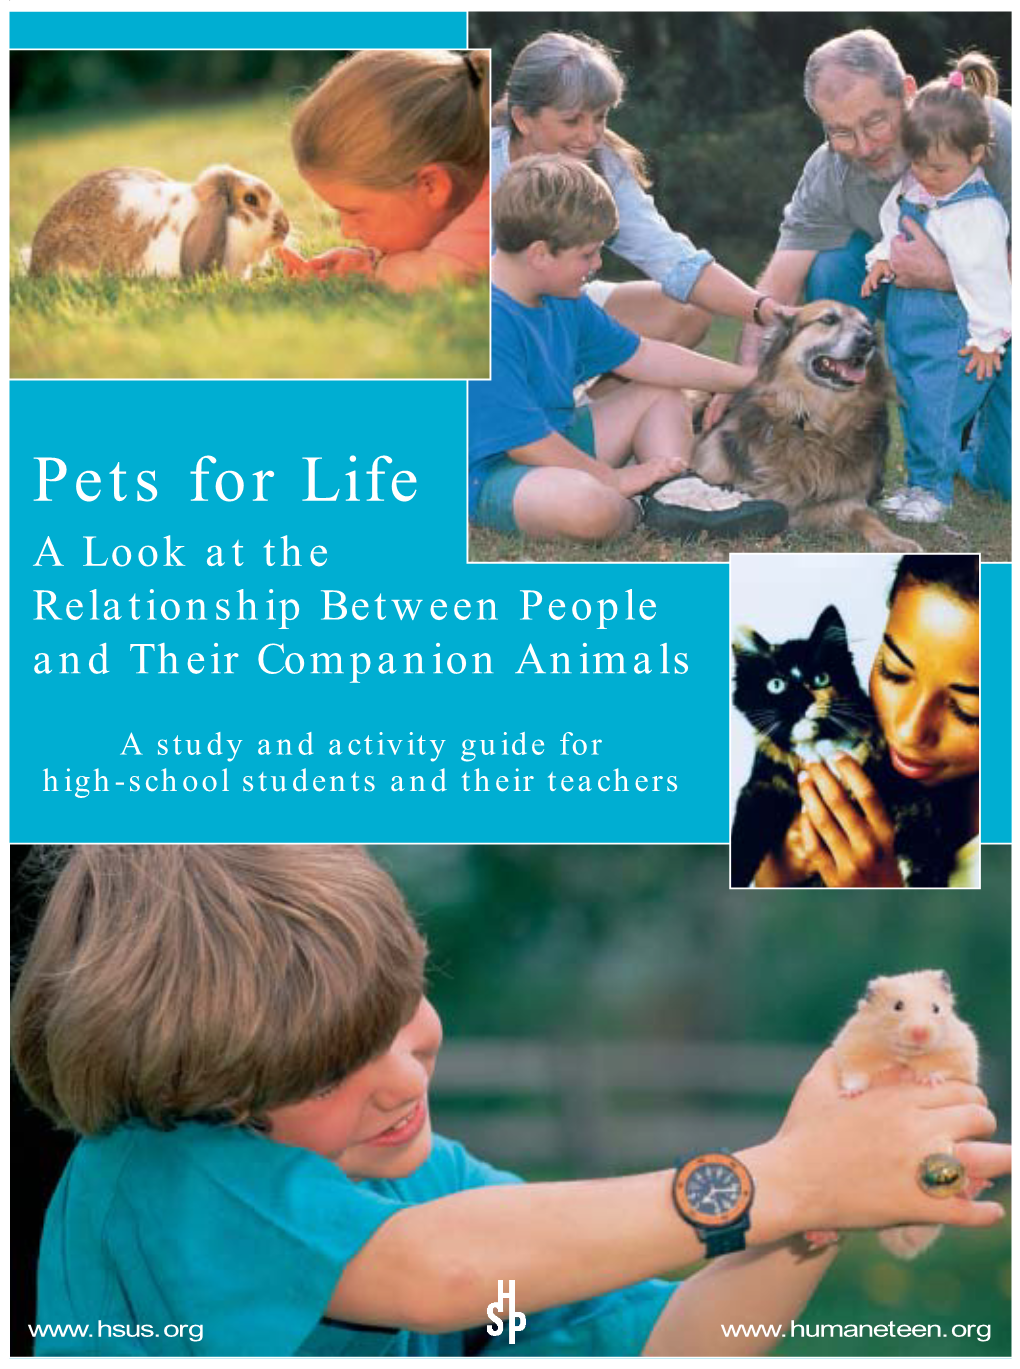 Pets for Life a Look at the Relationship Between People and Their Companion Animals